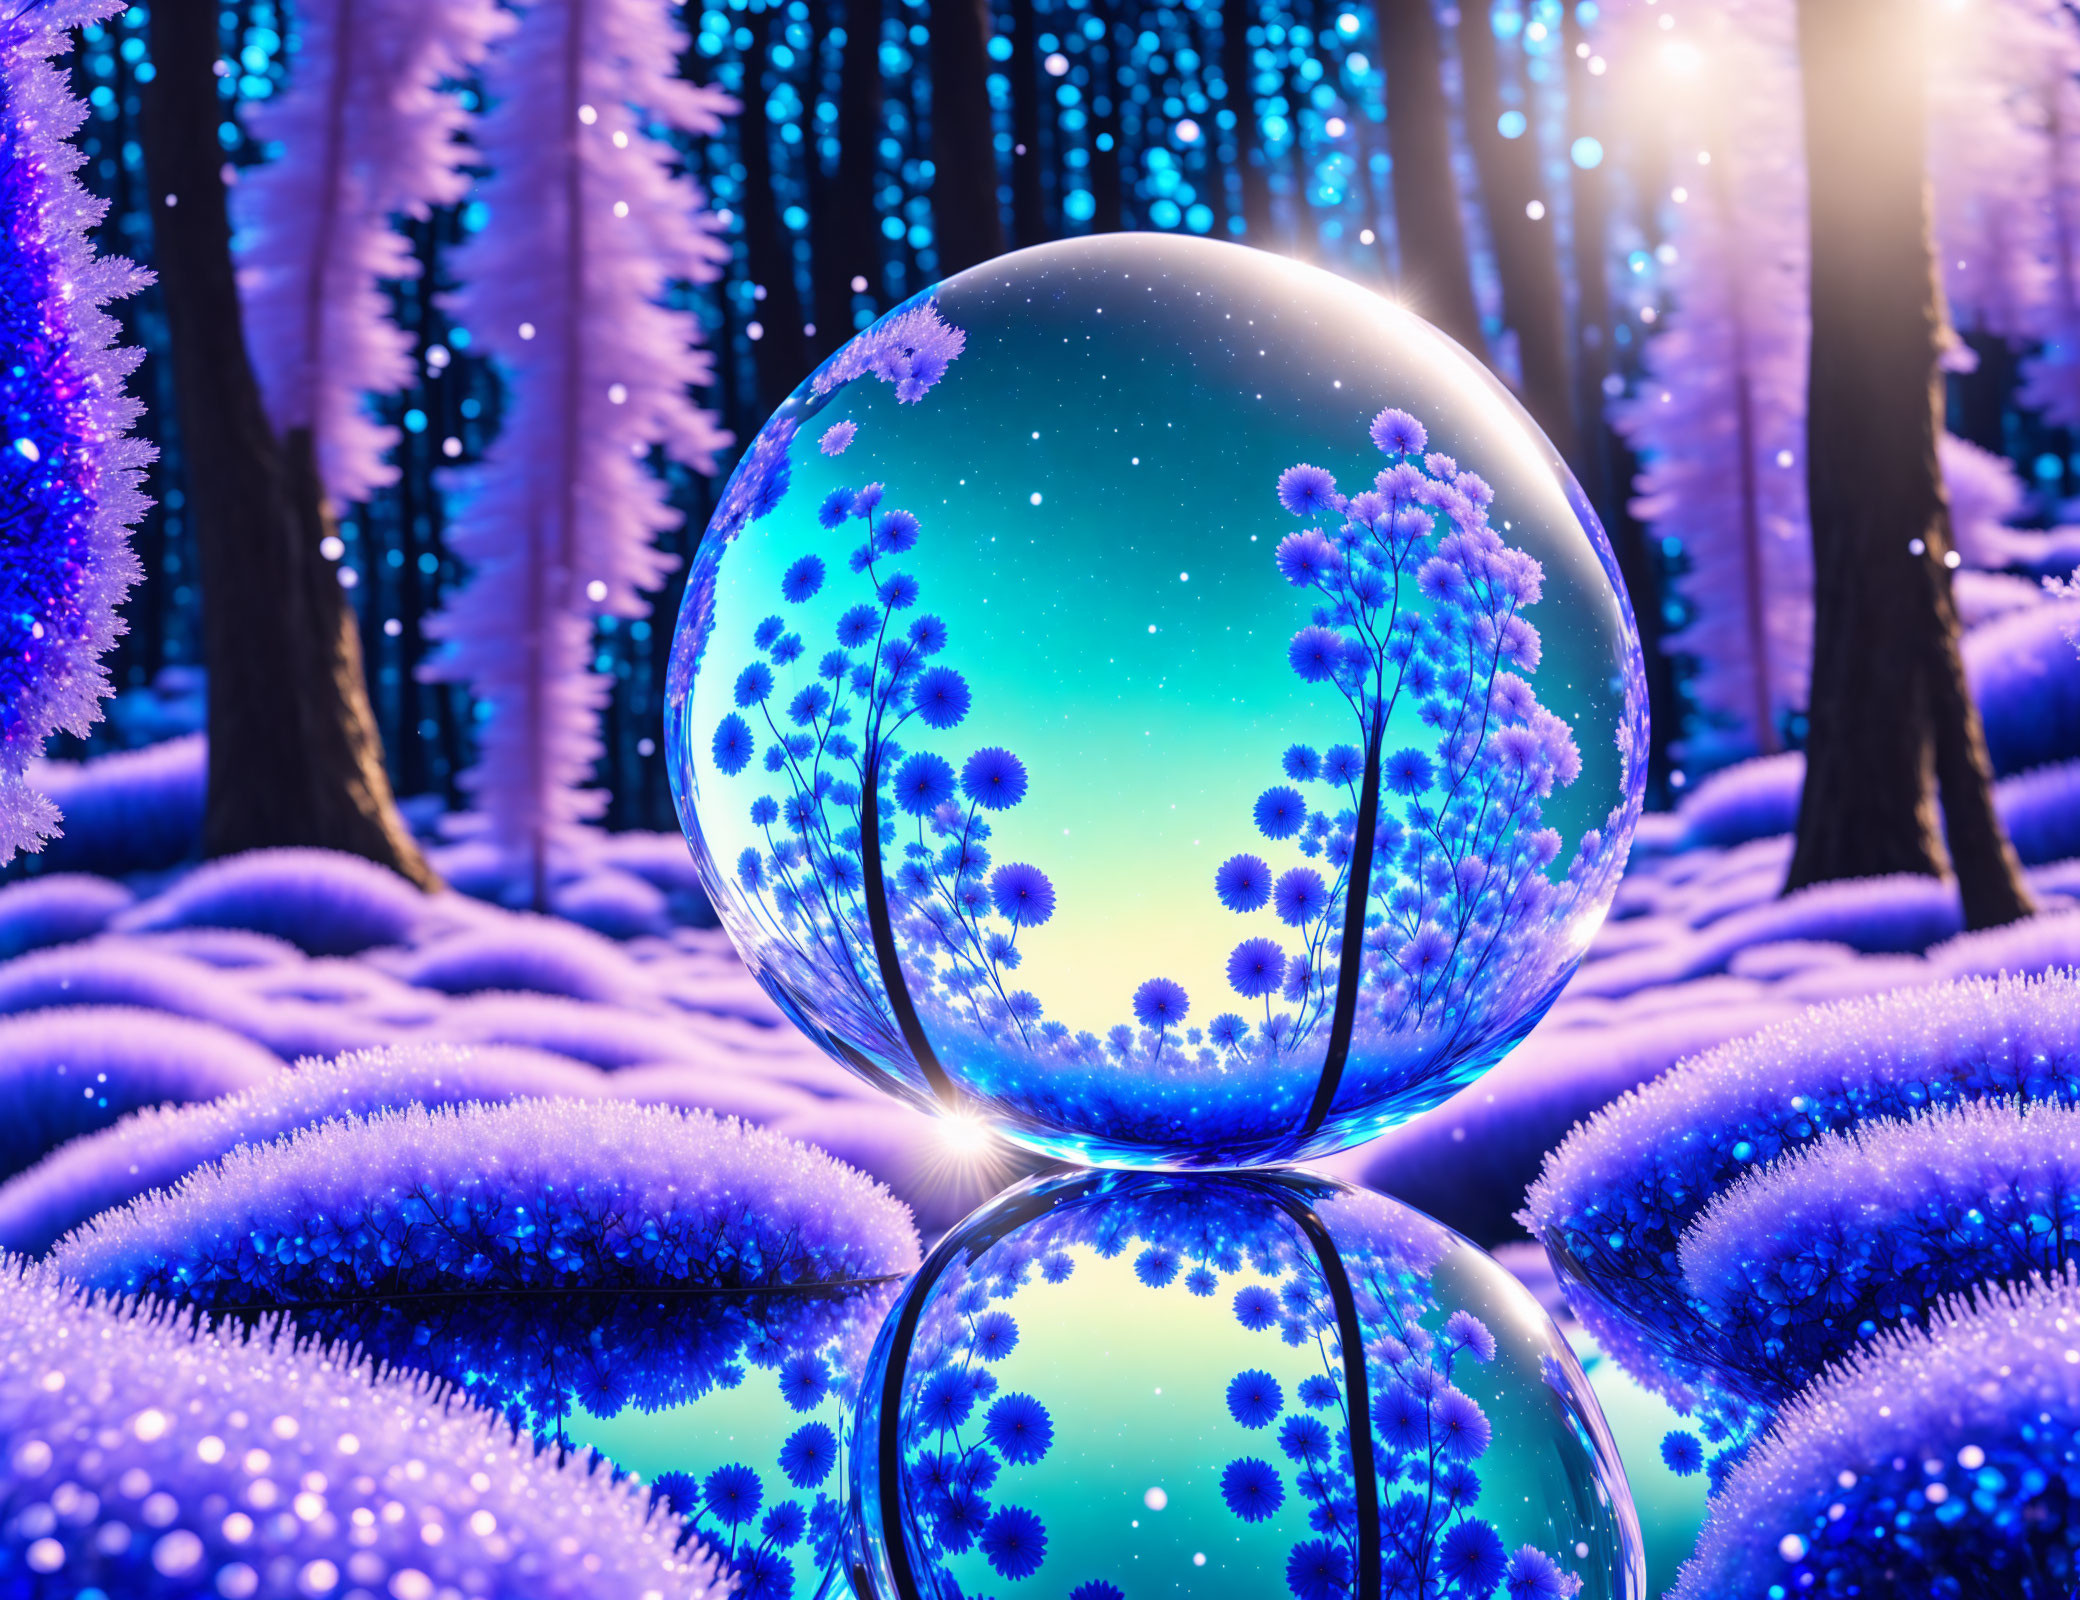 Crystal ball in surreal forest under starry sky